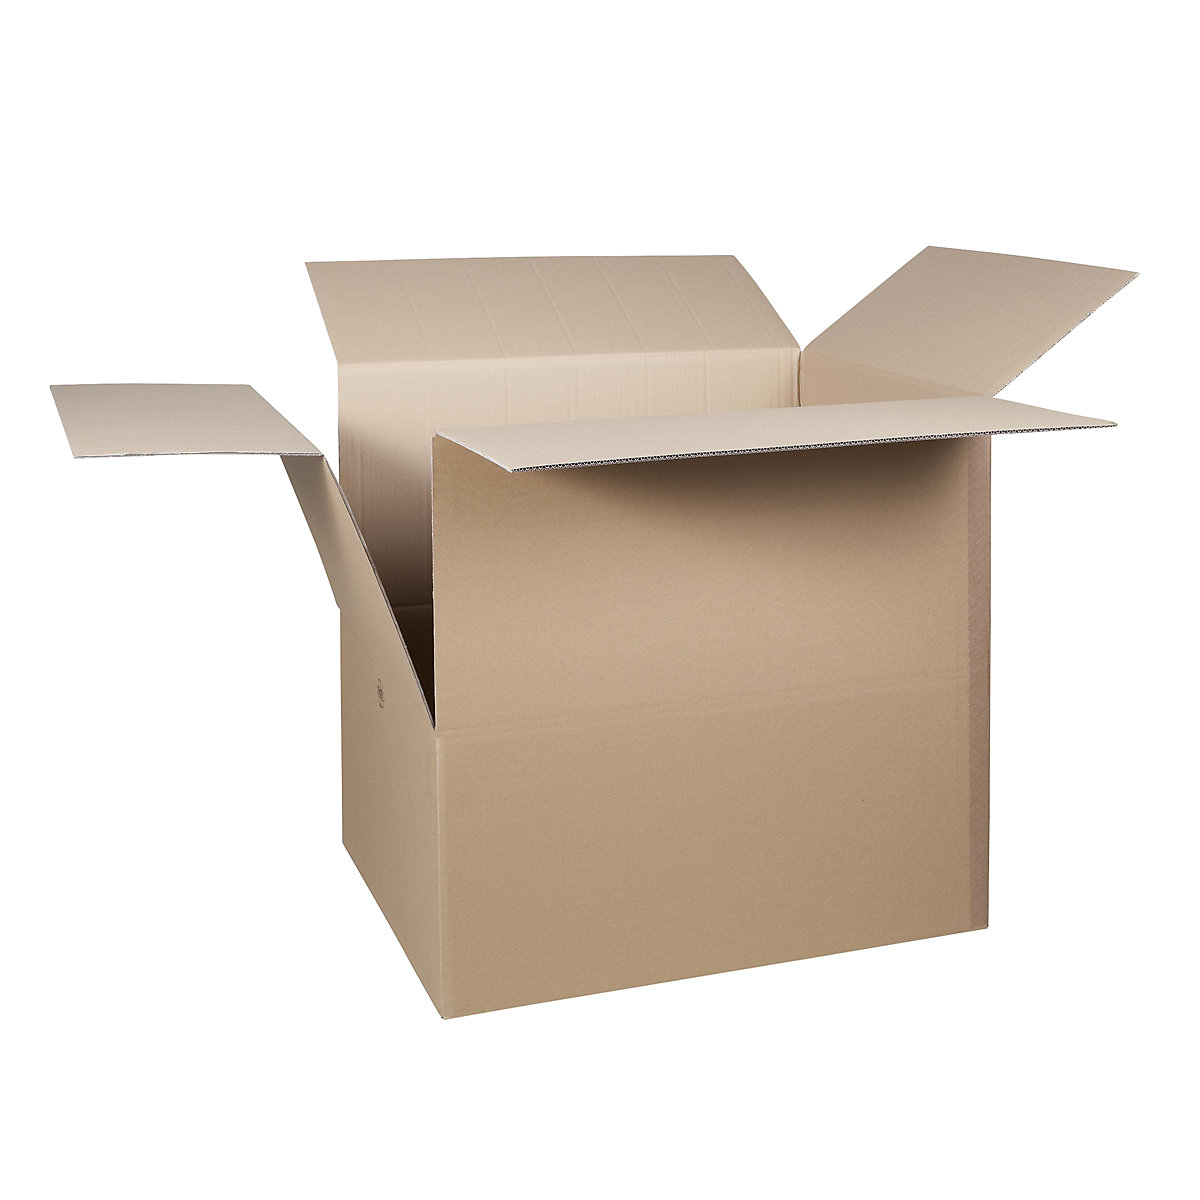 Folding cardboard box, FEFCO 0201, made of double fluted cardboard, internal dimensions 780 x 580 x 750 mm, pack of 100-46